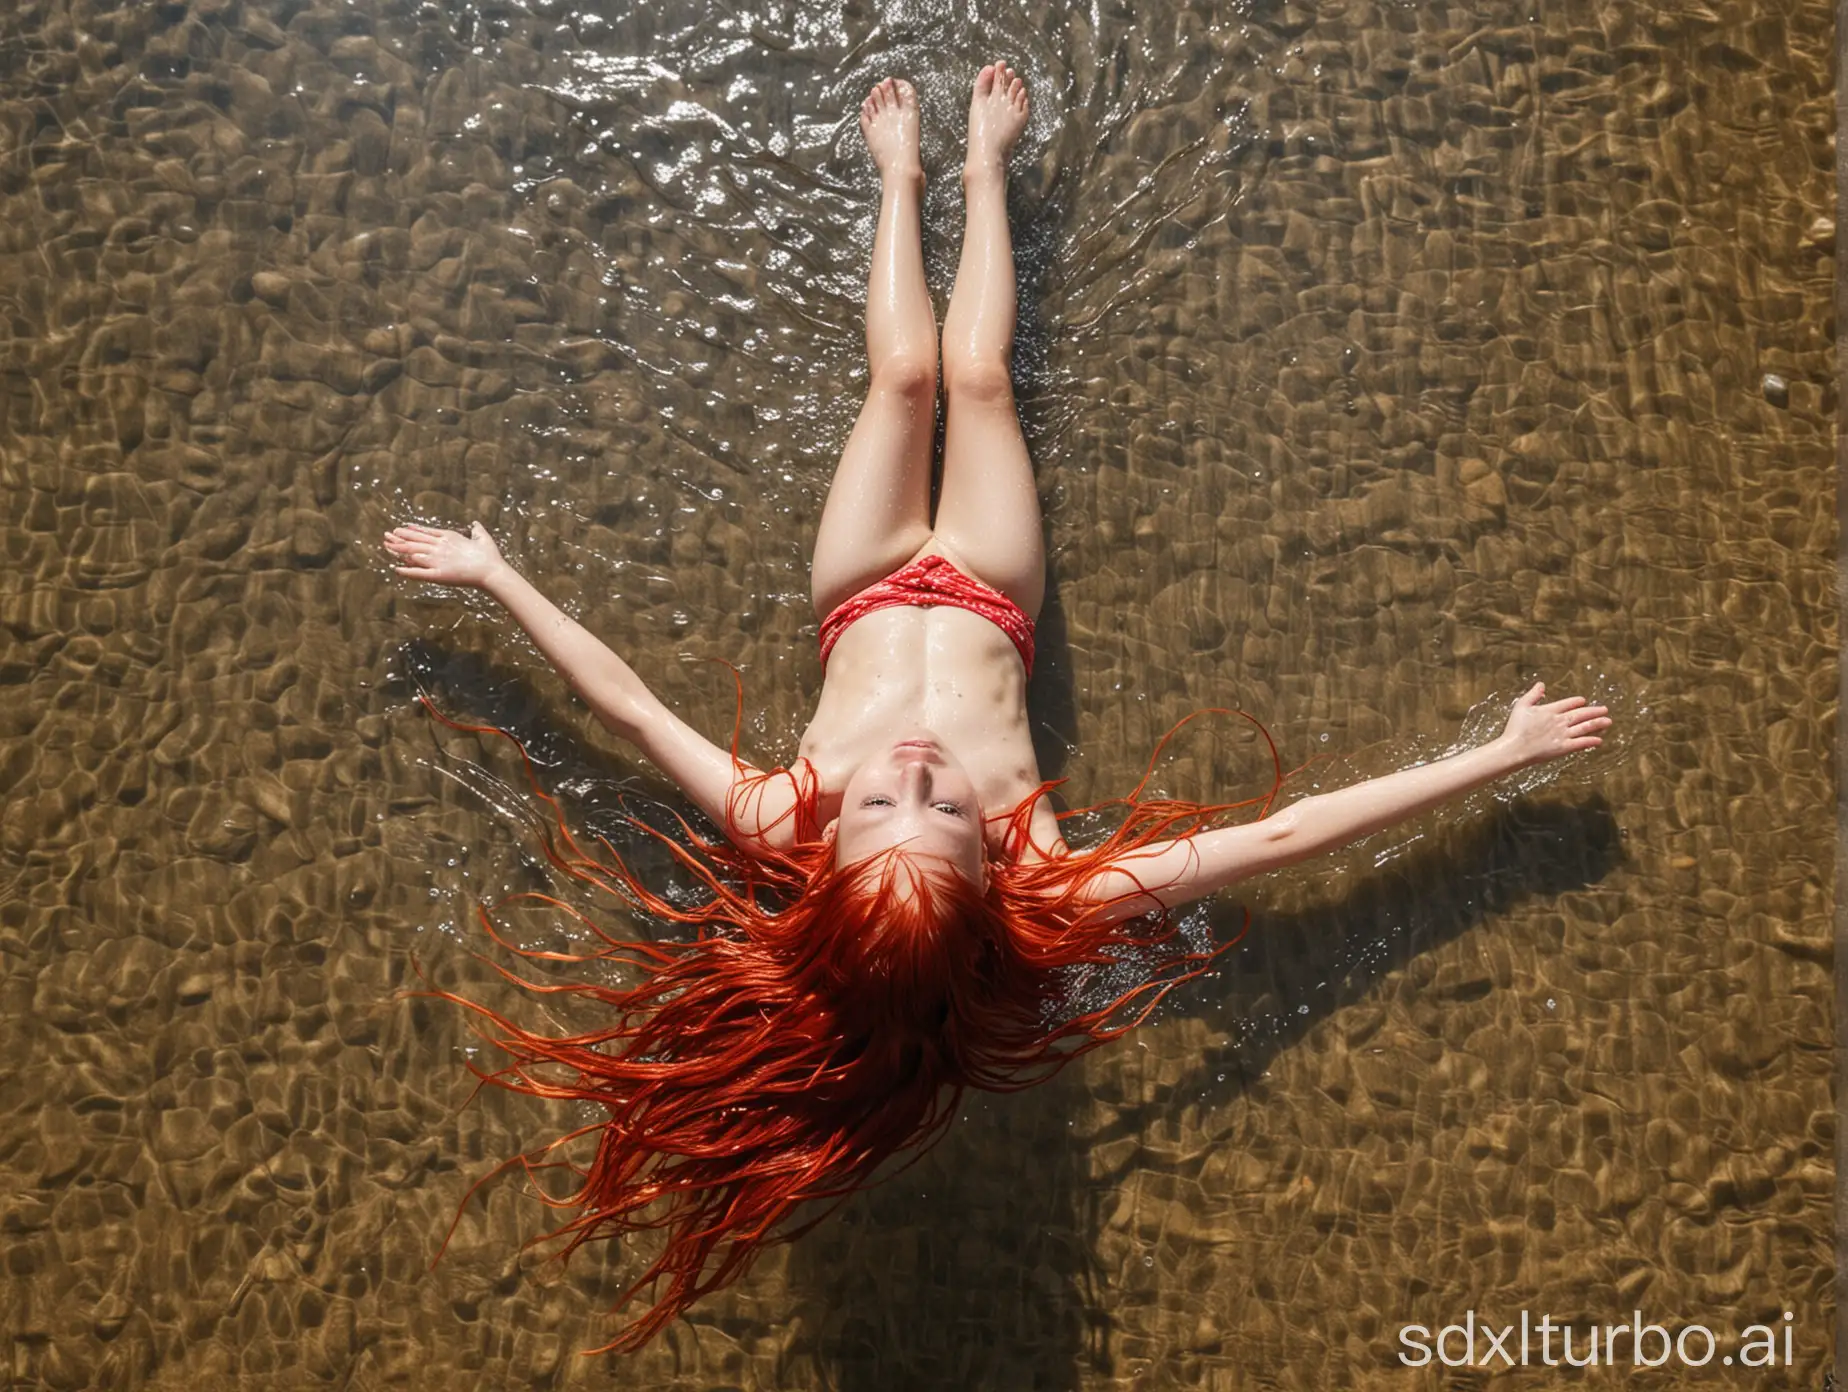 five year old girl in string laying on air matrass in water, wet, showing from the back, red long hair, shirtless